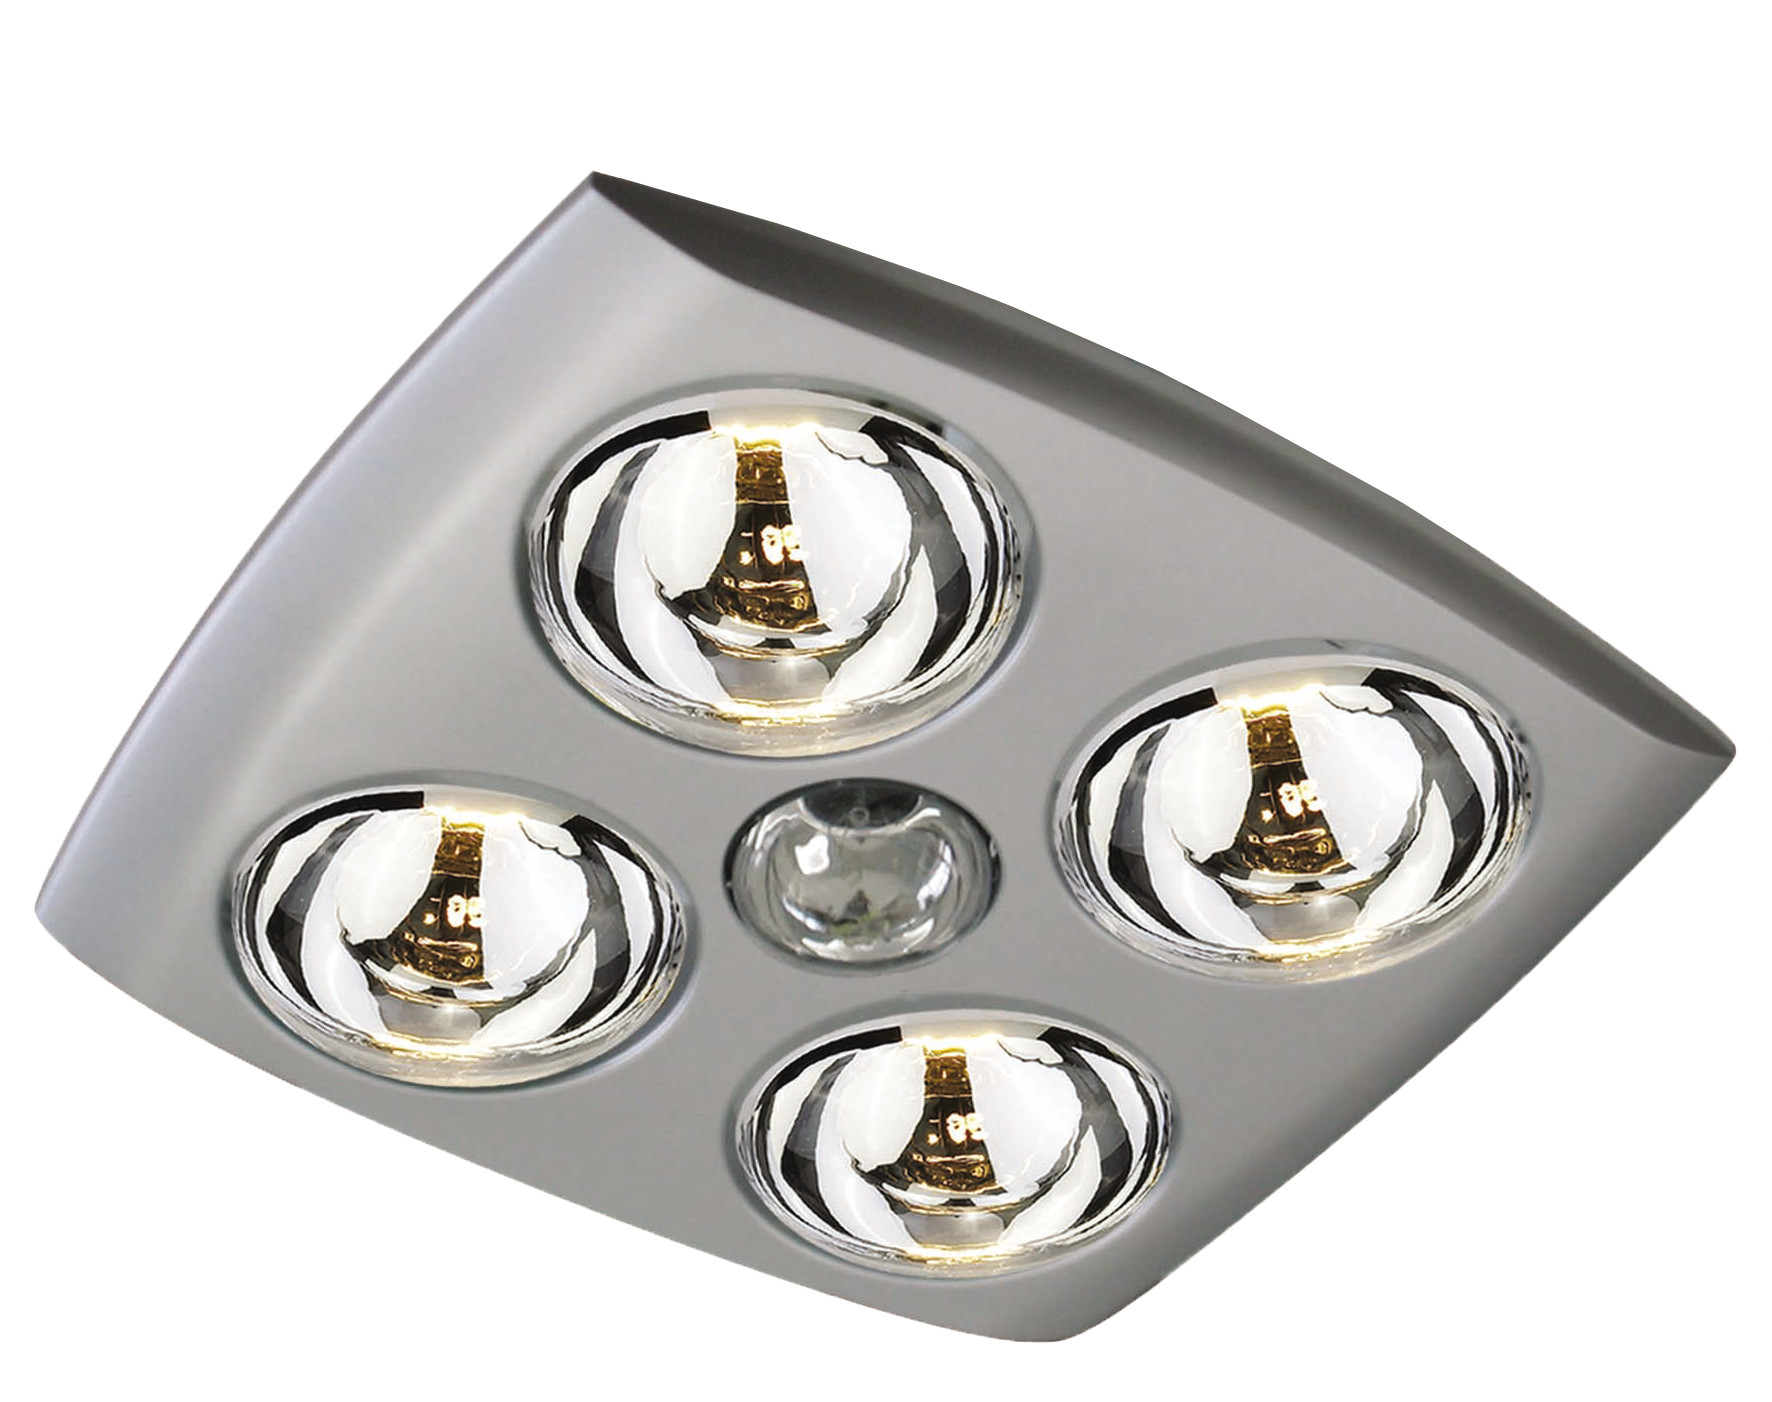 Bathroom Ceiling Light With Heater
 Bathroom ceiling heat lamps – Lighting and Ceiling Fans